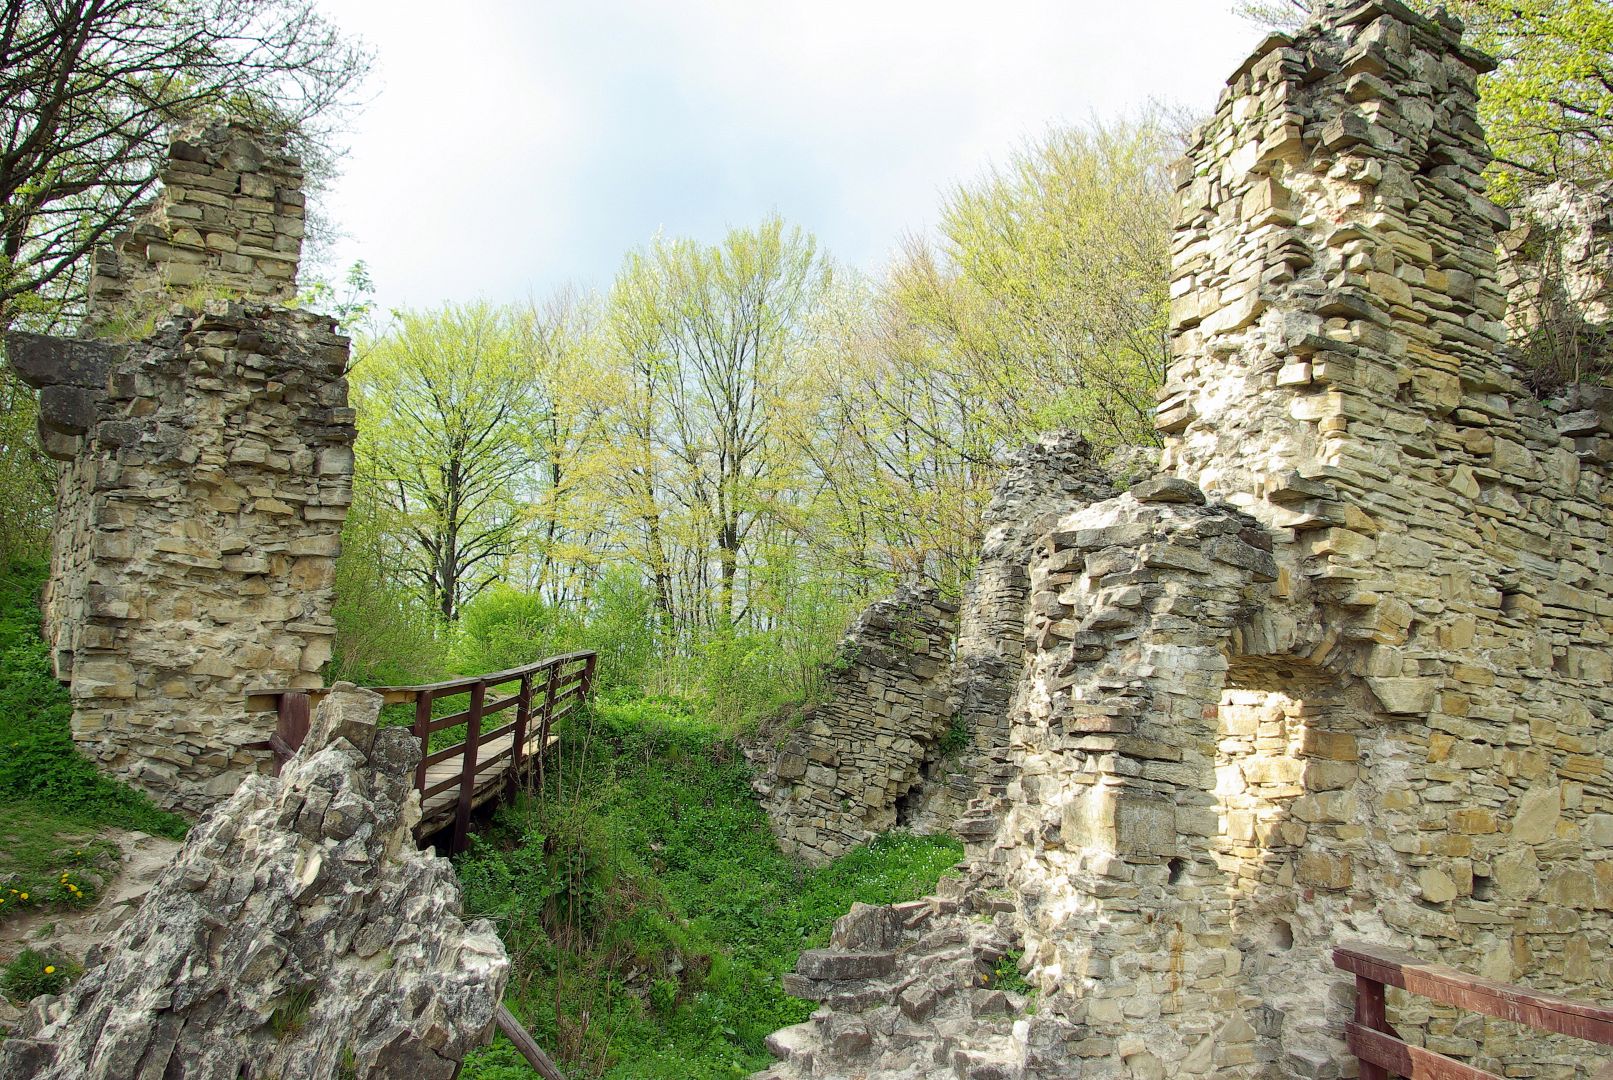 Interiors of a former stronghold